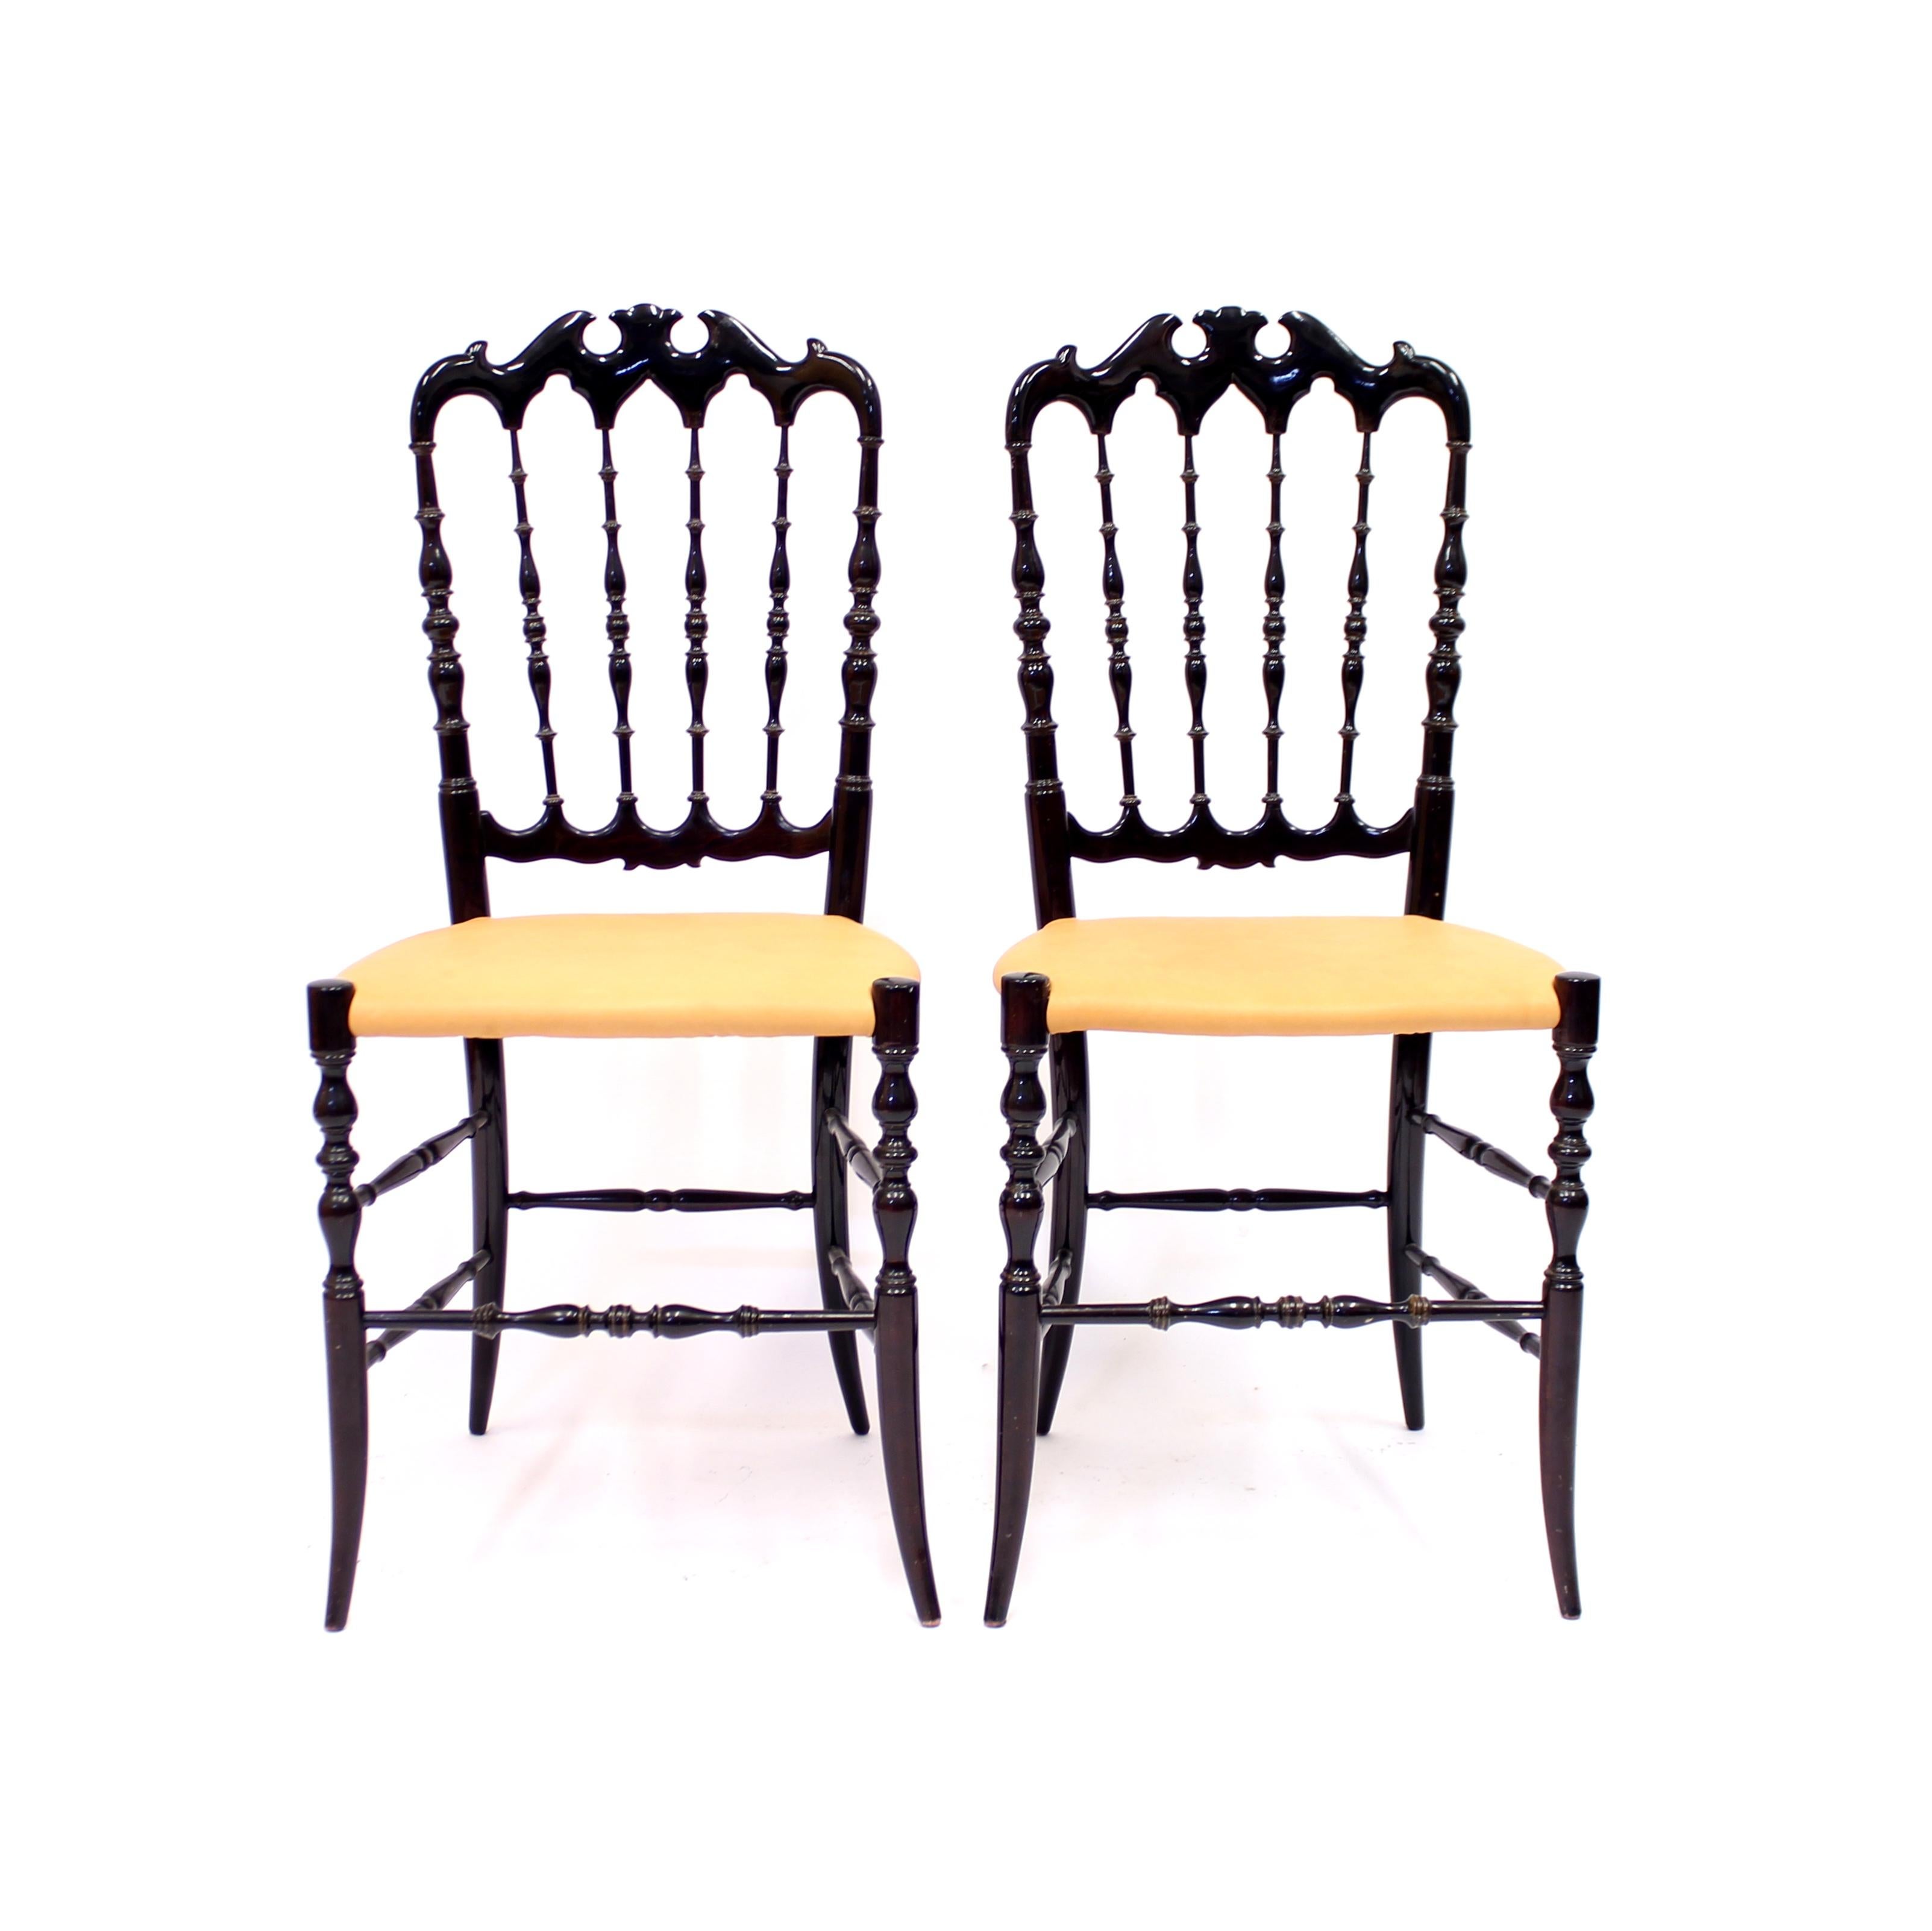 Mid-Century Modern Pair of Vintage Chiavari Chairs with Leather Seats, circa 1950